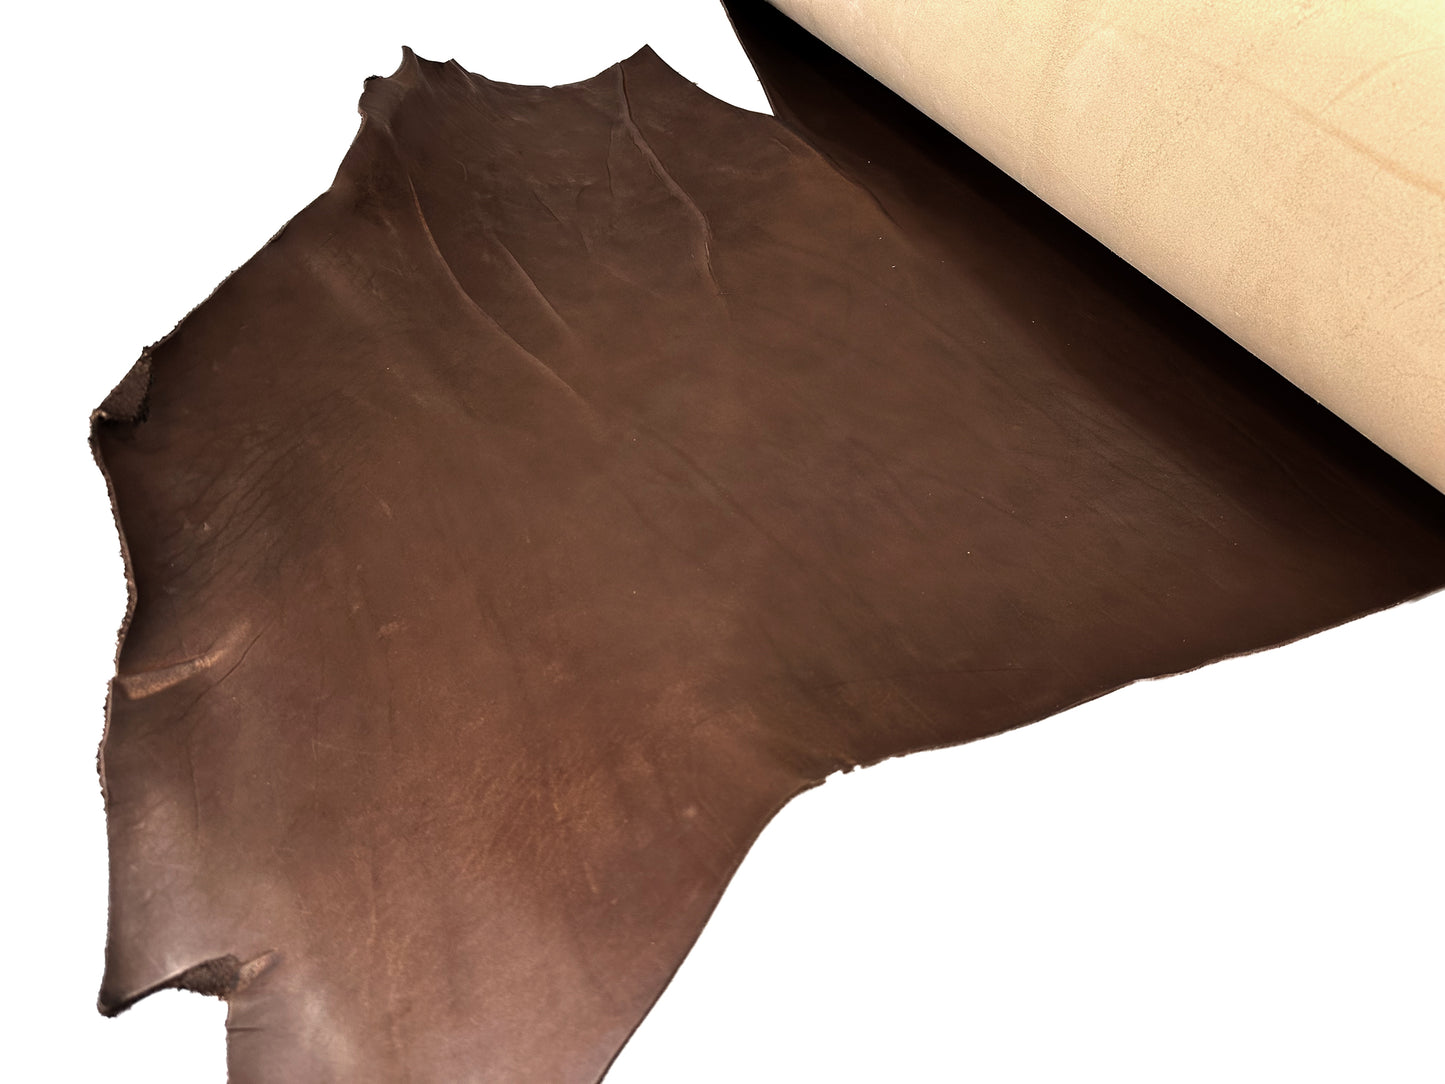 MW Teacore Vagitable Tanned Leather #Choco